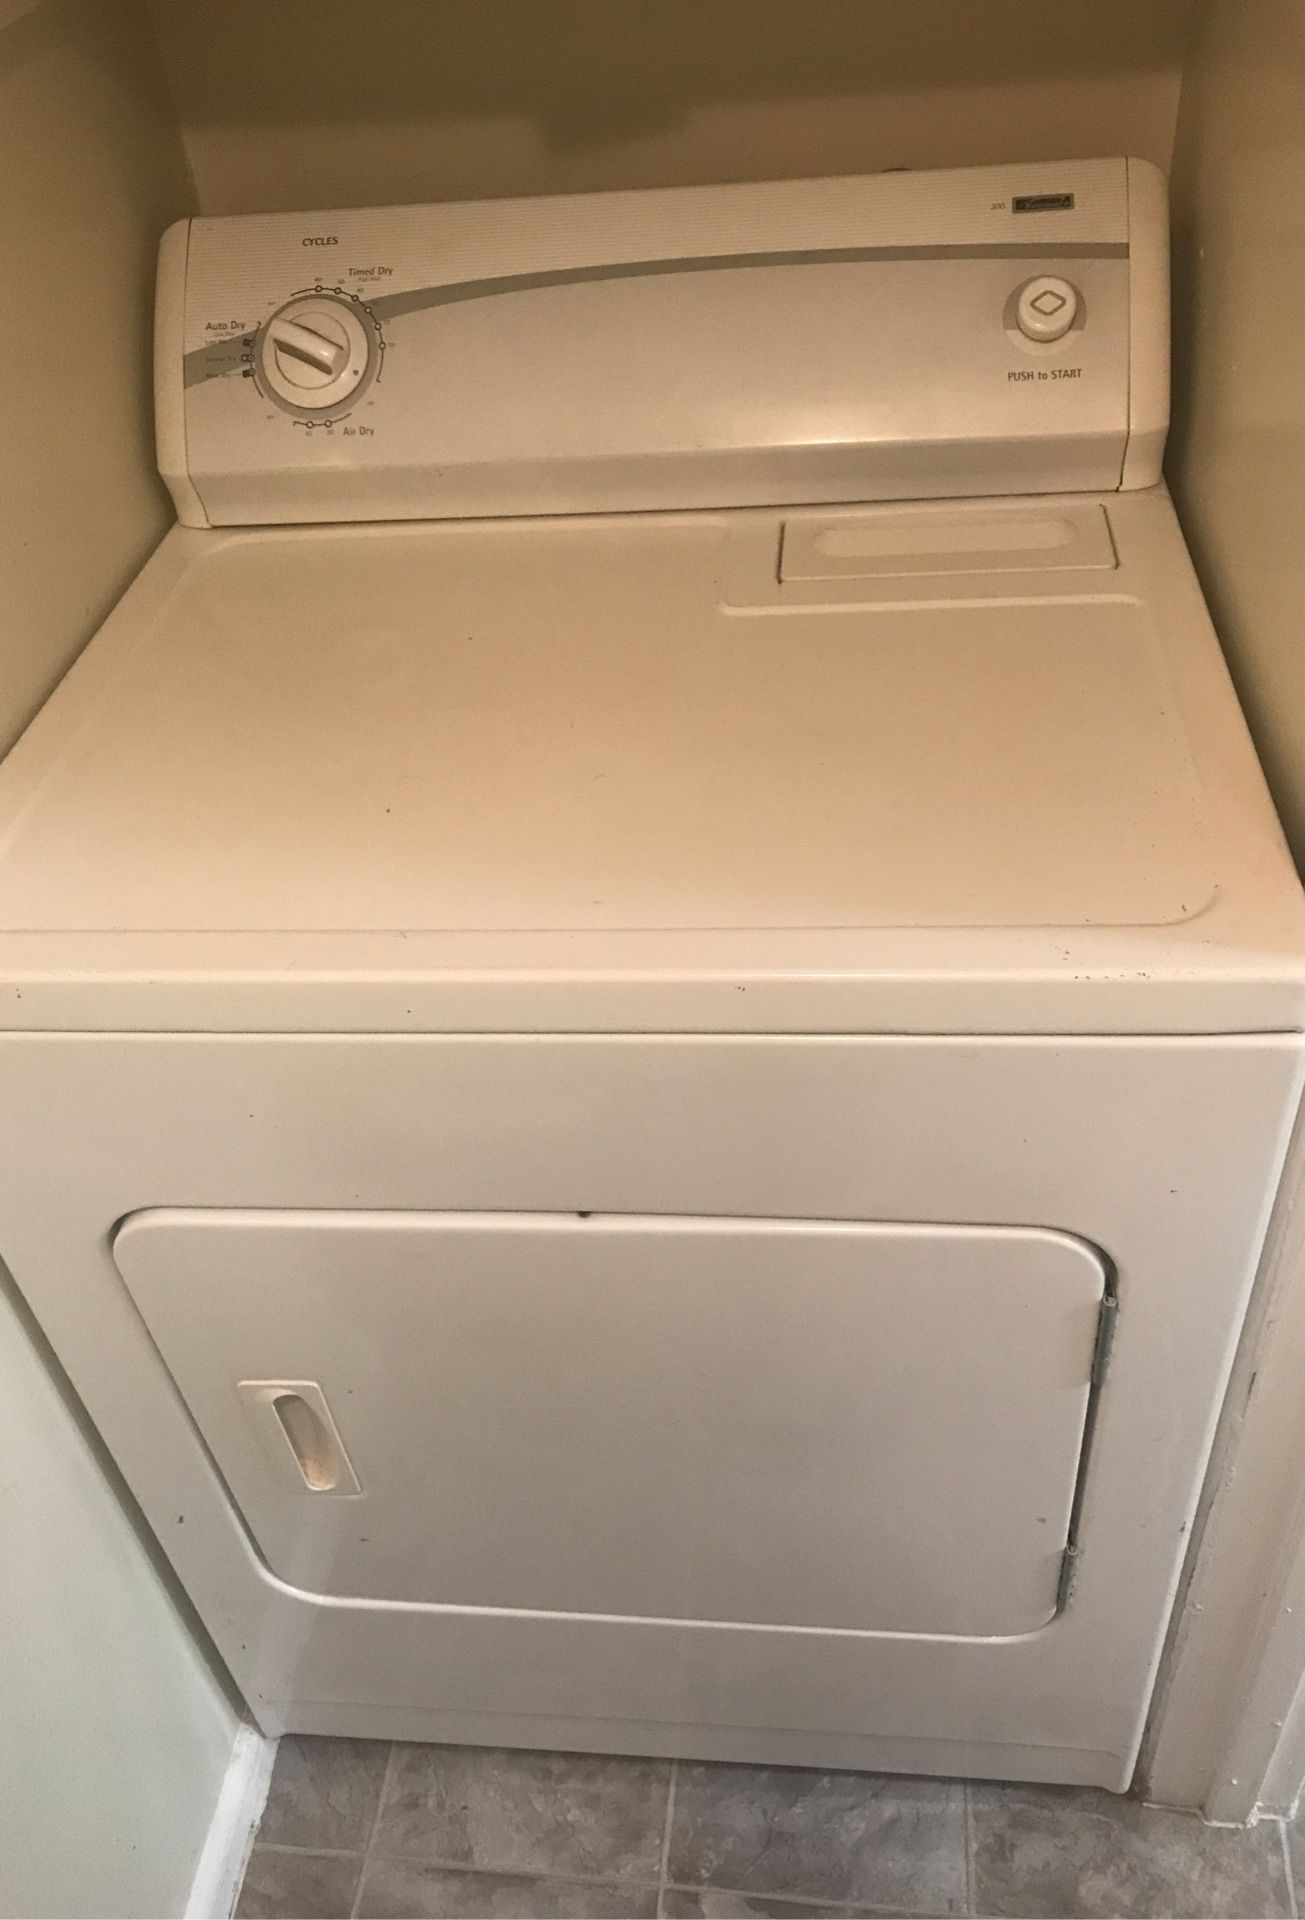 Frigidaire heavy duty washers and kenmore dryer